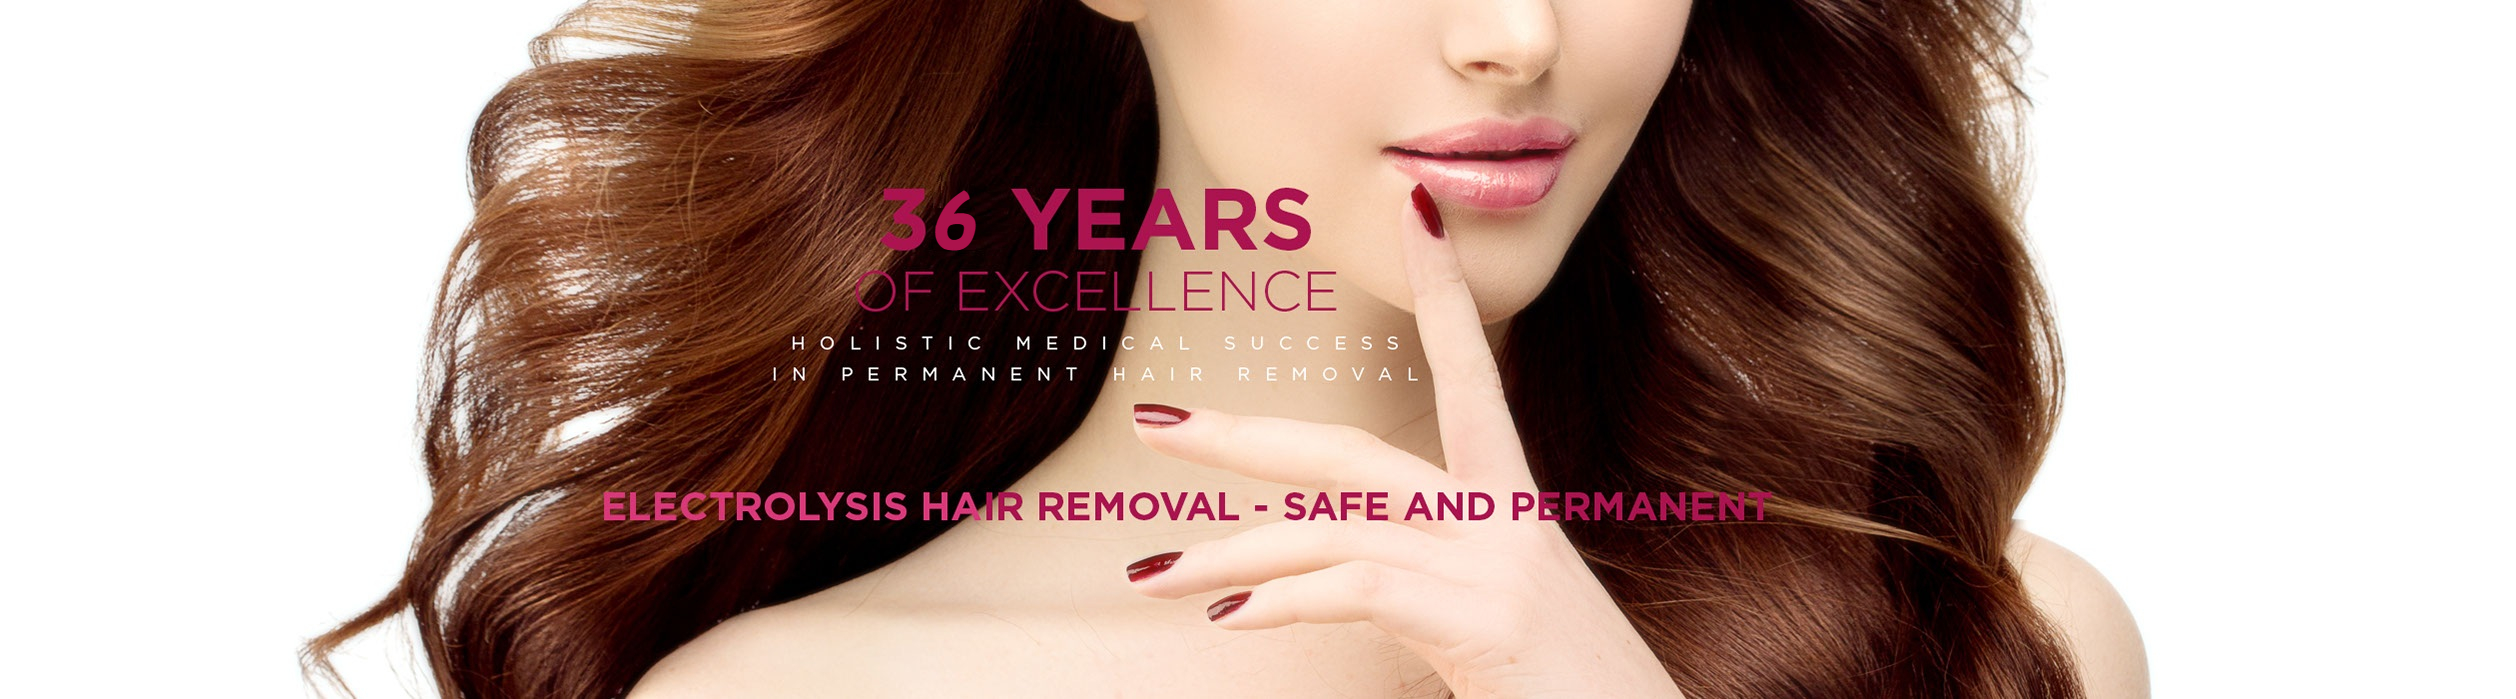 What is Laser Hair reduction? Is it safe & permanent